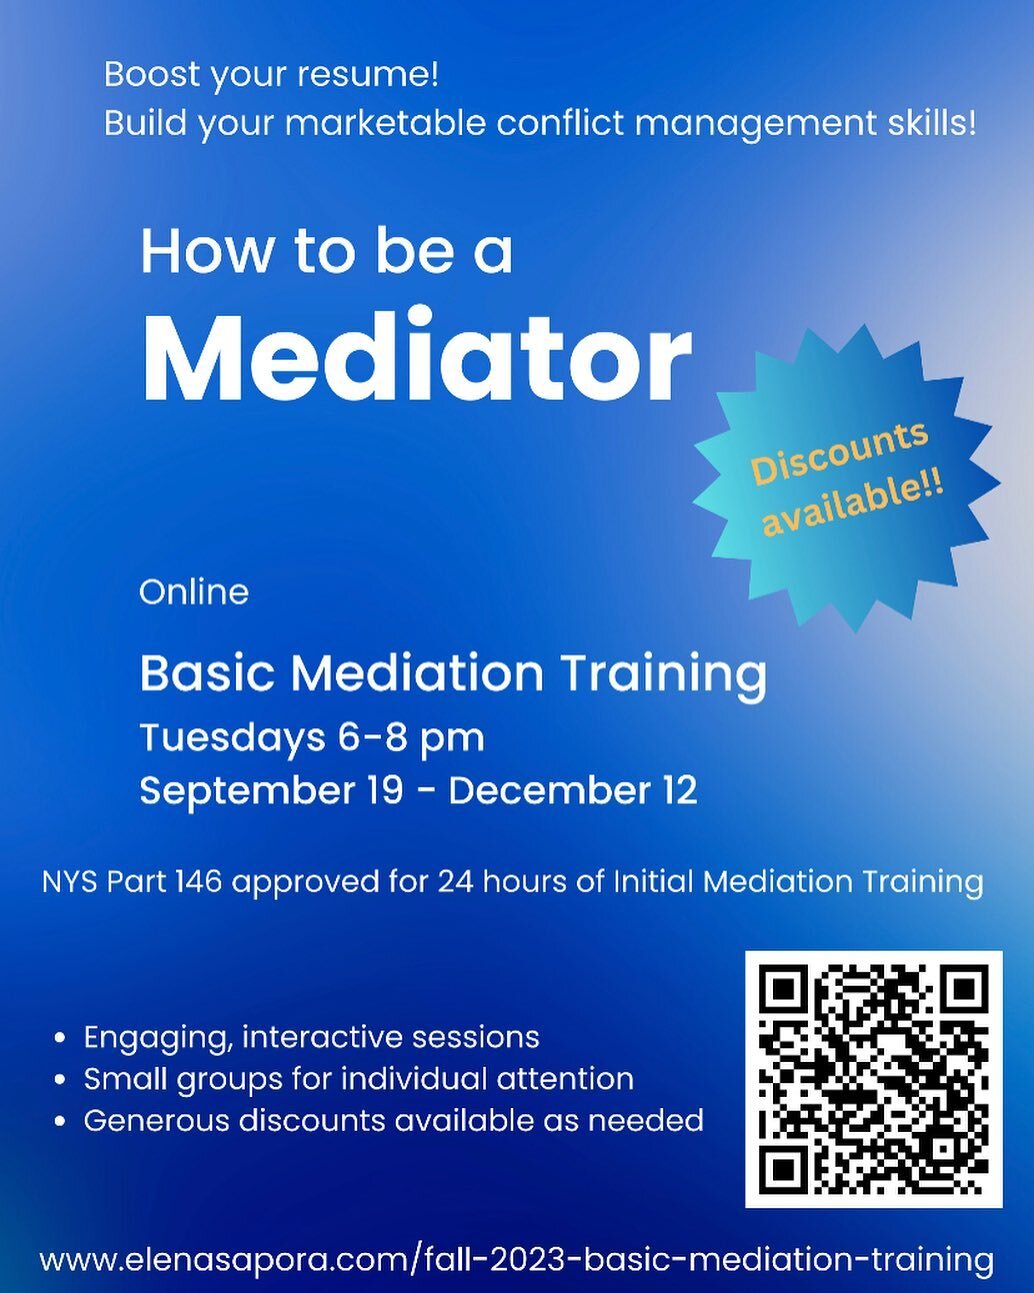 The positive impact of mediation practice on your life really can&rsquo;t be exaggerated. The knowledge, awareness, and tools can be applied in every area of your life, from intimate relationships, family, friendship, to professional contexts and bey